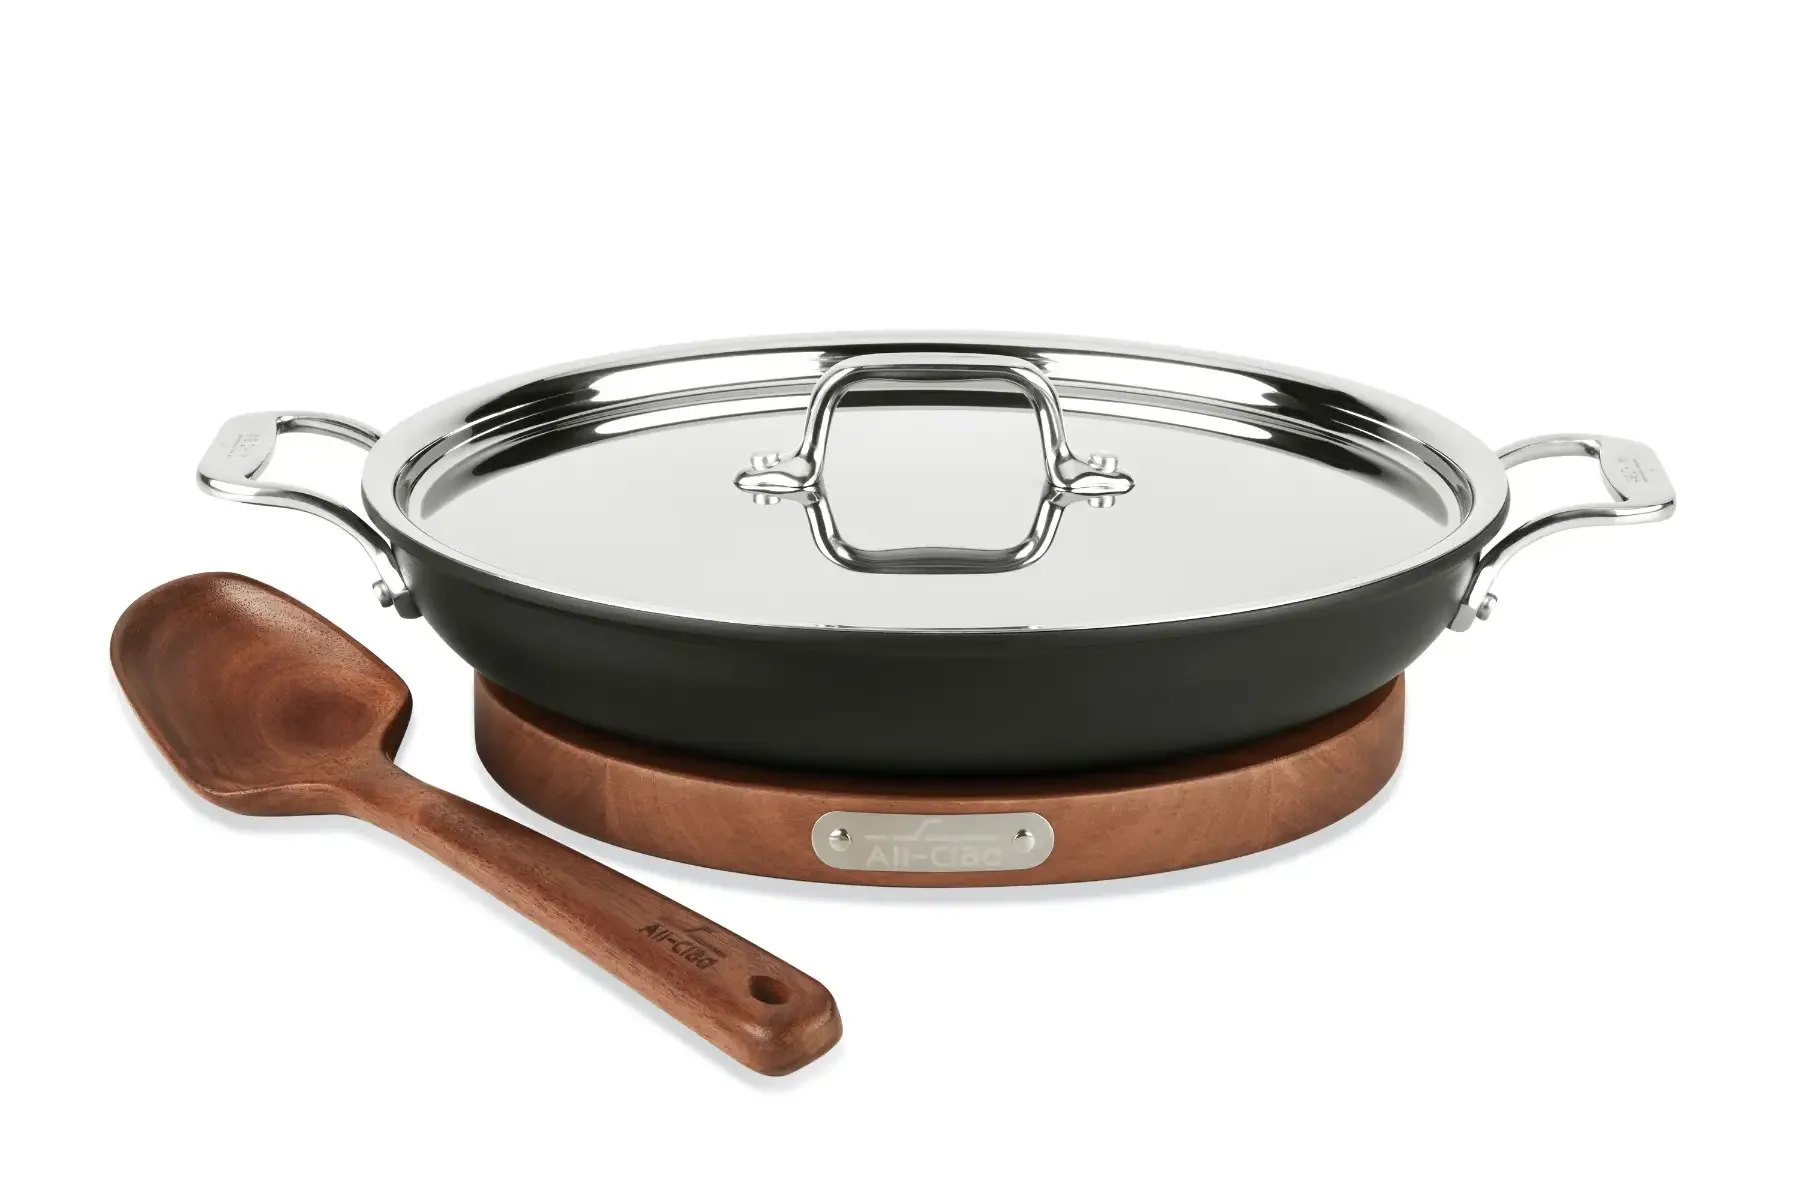 All-Clad outlet sale: Save up to 74% on long-lasting pots and pans now